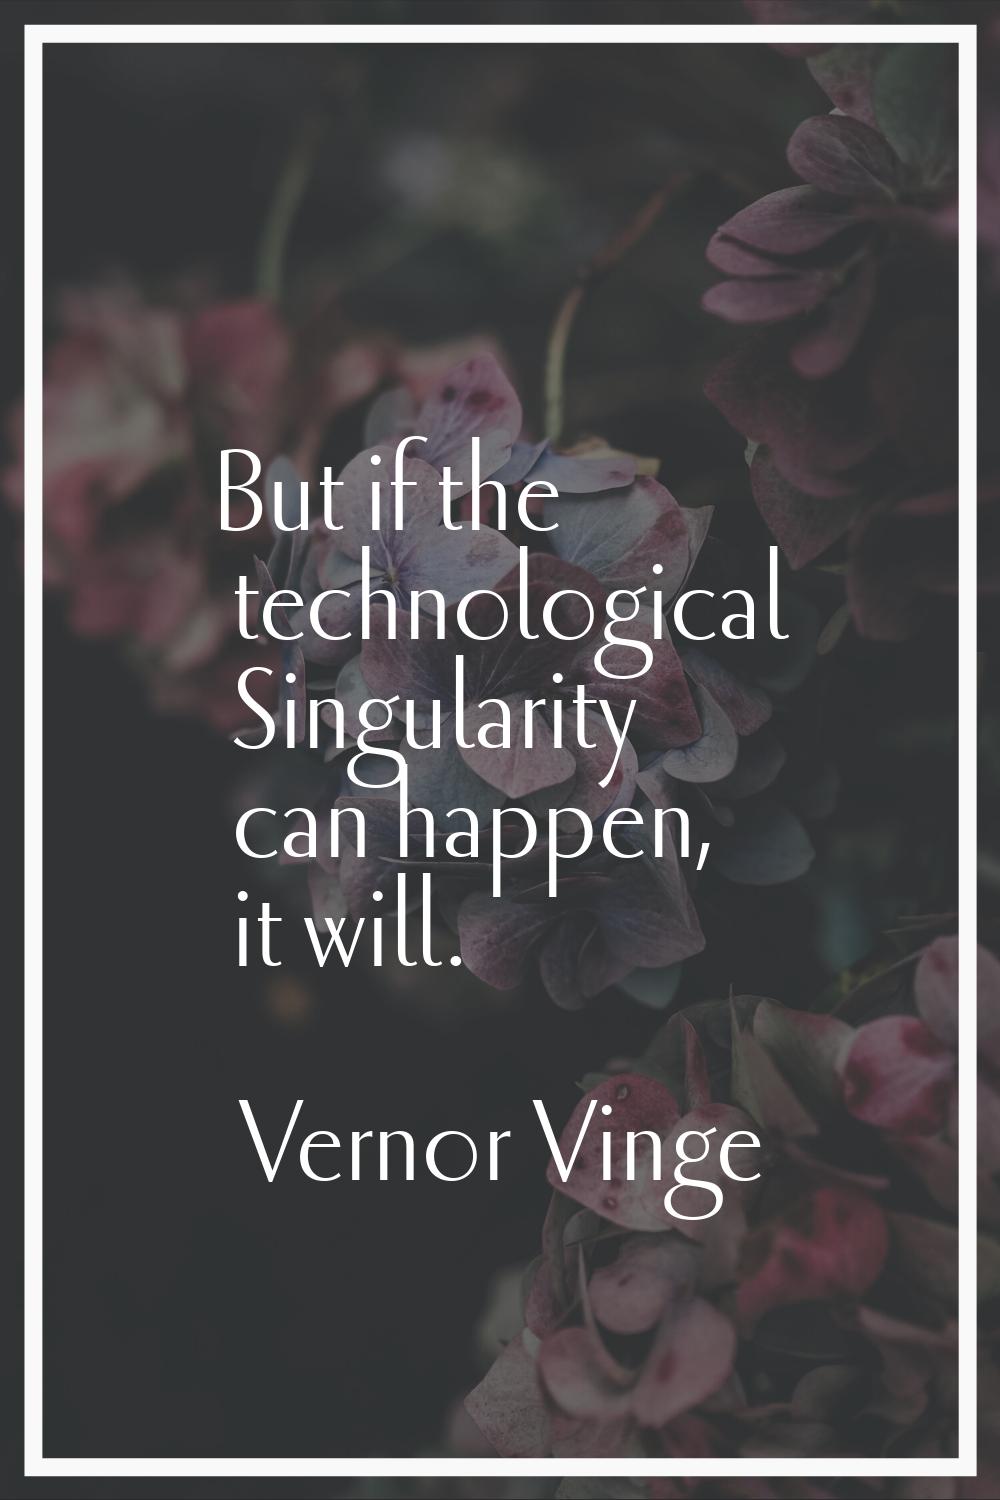 But if the technological Singularity can happen, it will.